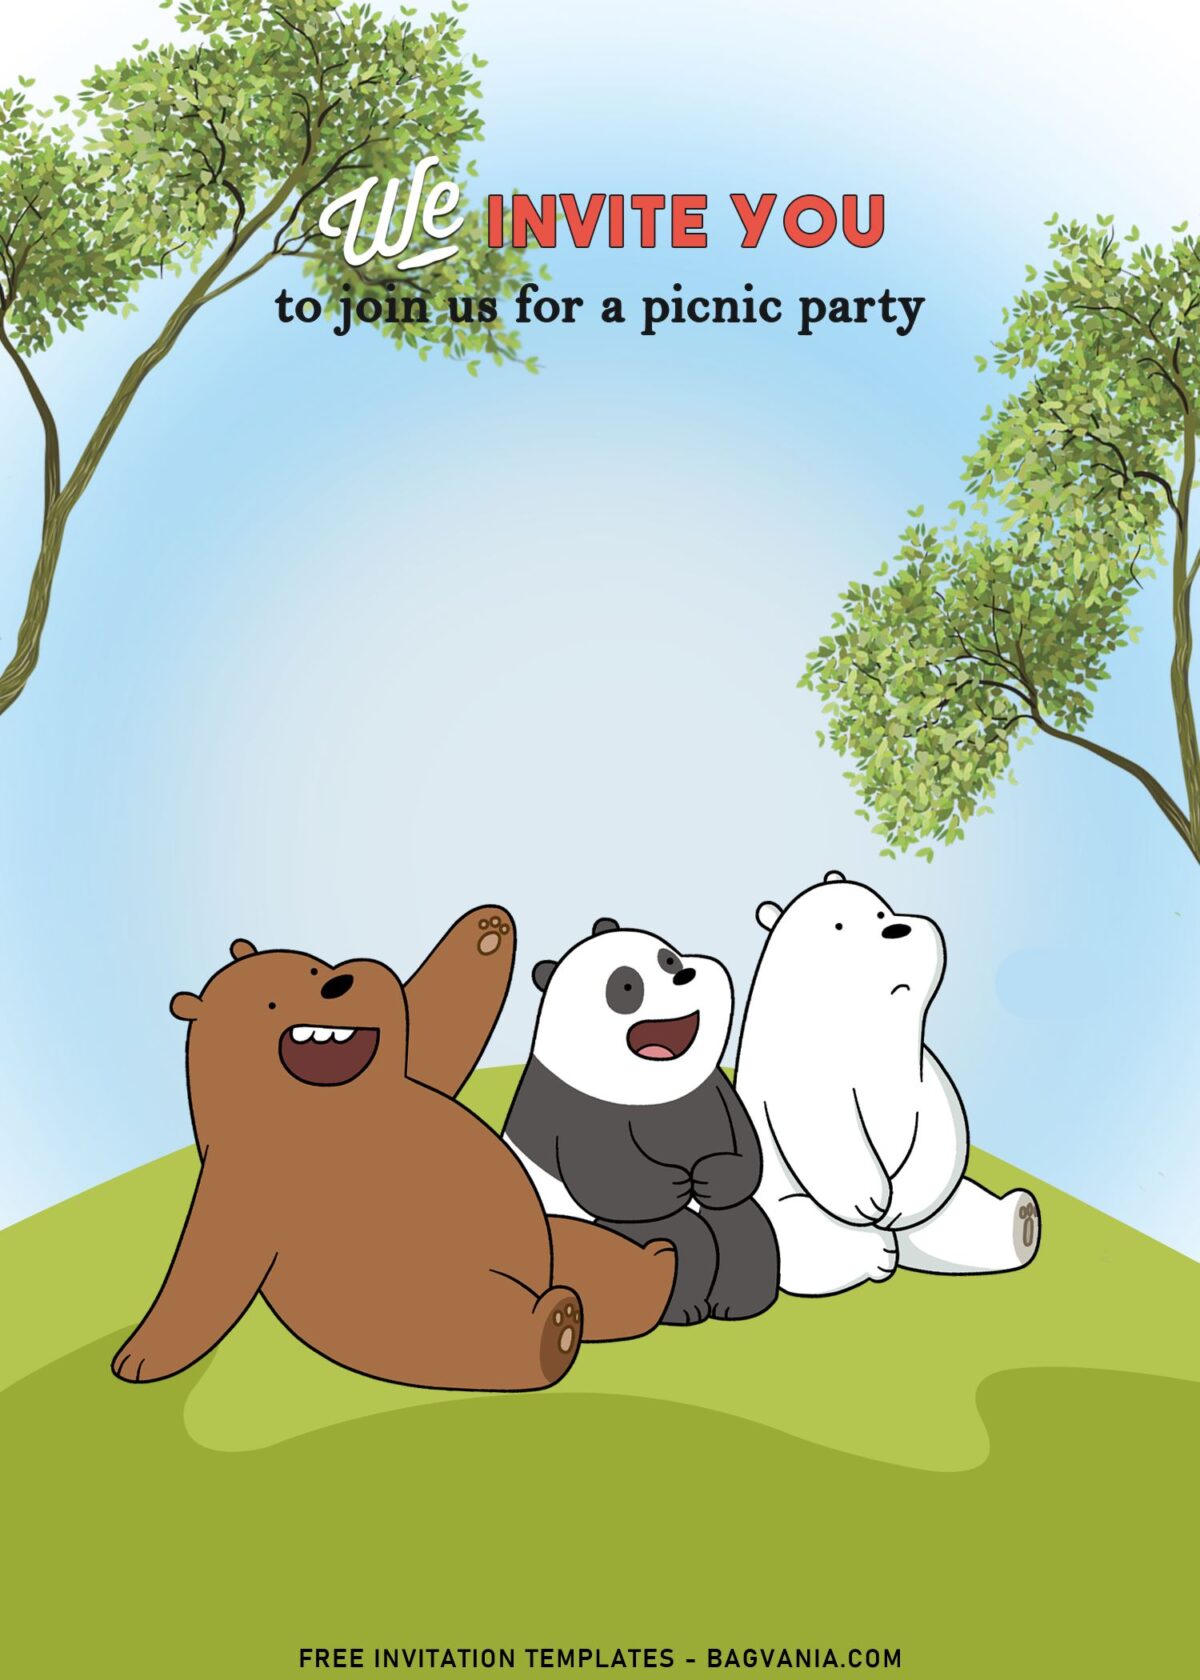 10+ We Bare Bears Birthday Invitation Templates with Adorable Grizzly Bear